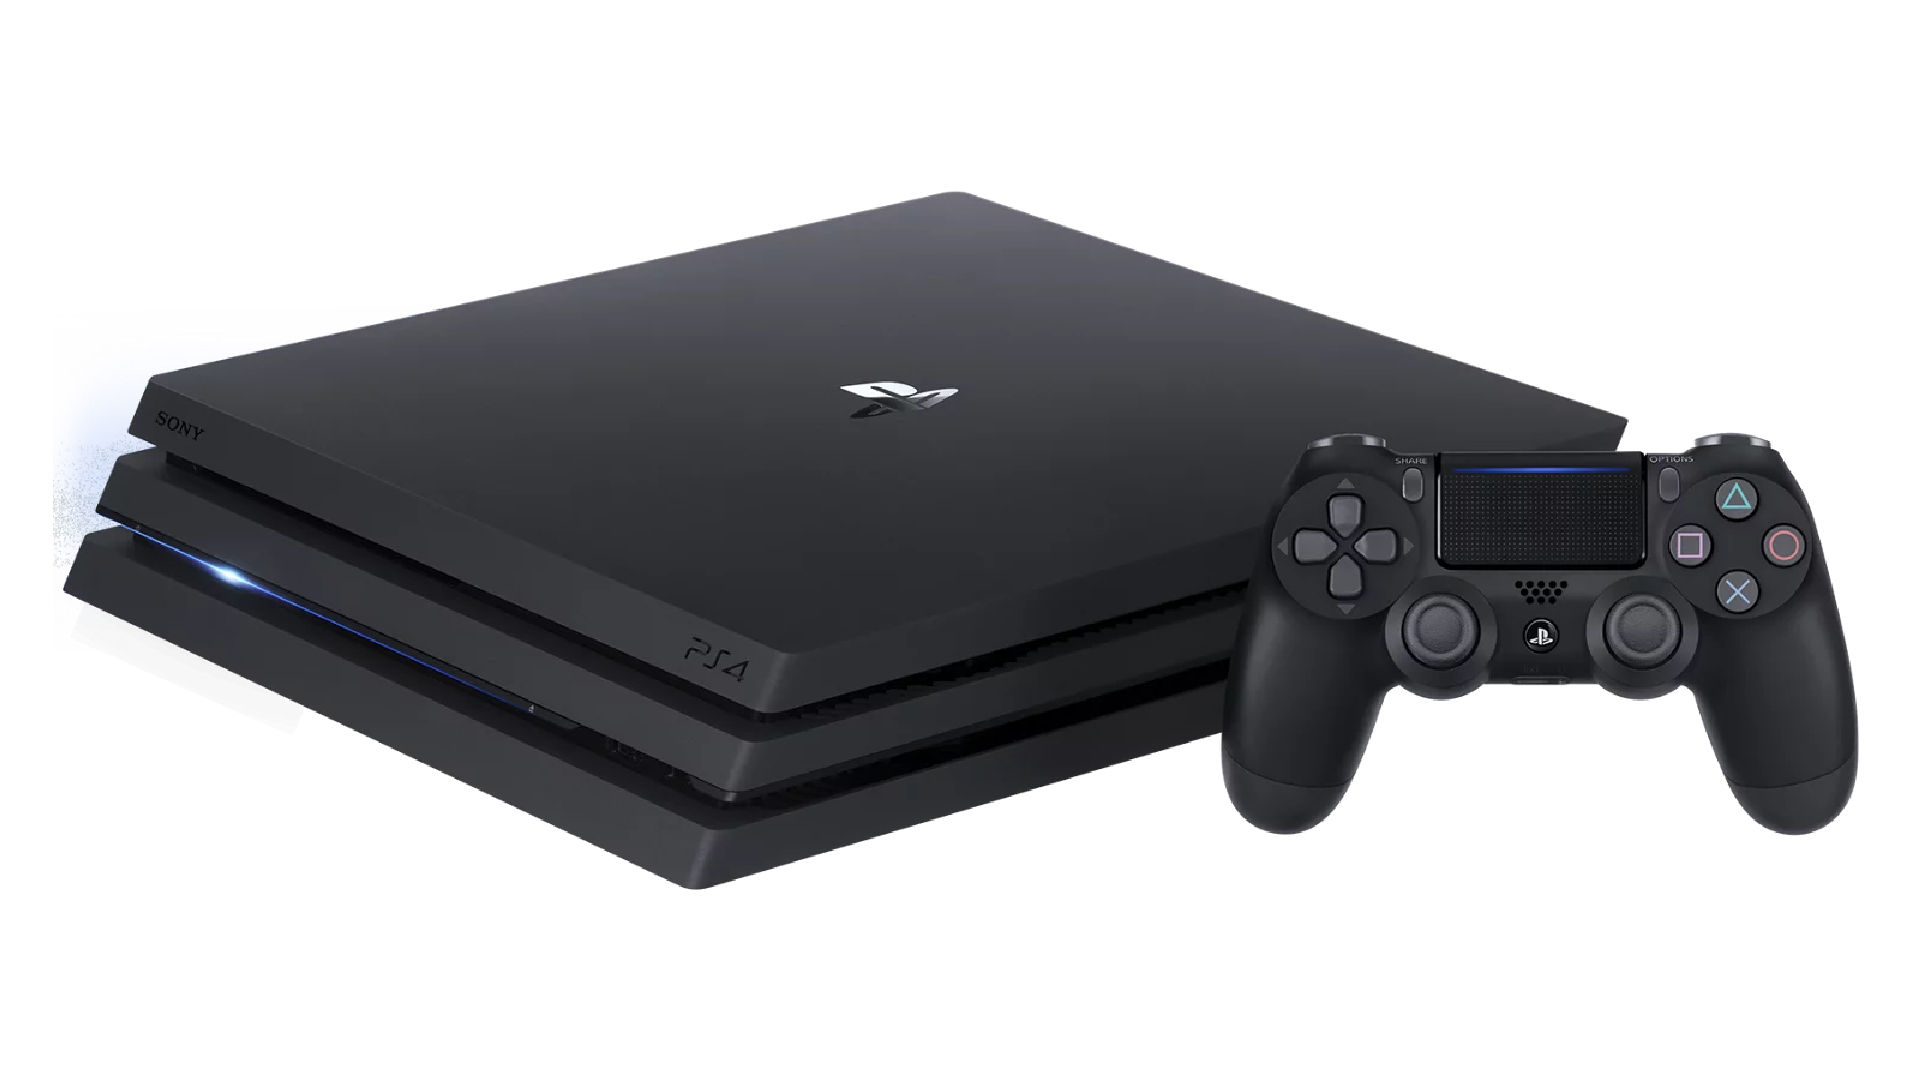 PlayStation 5 Slim (PS5 PRO) RELEASE DATE Leaked! 